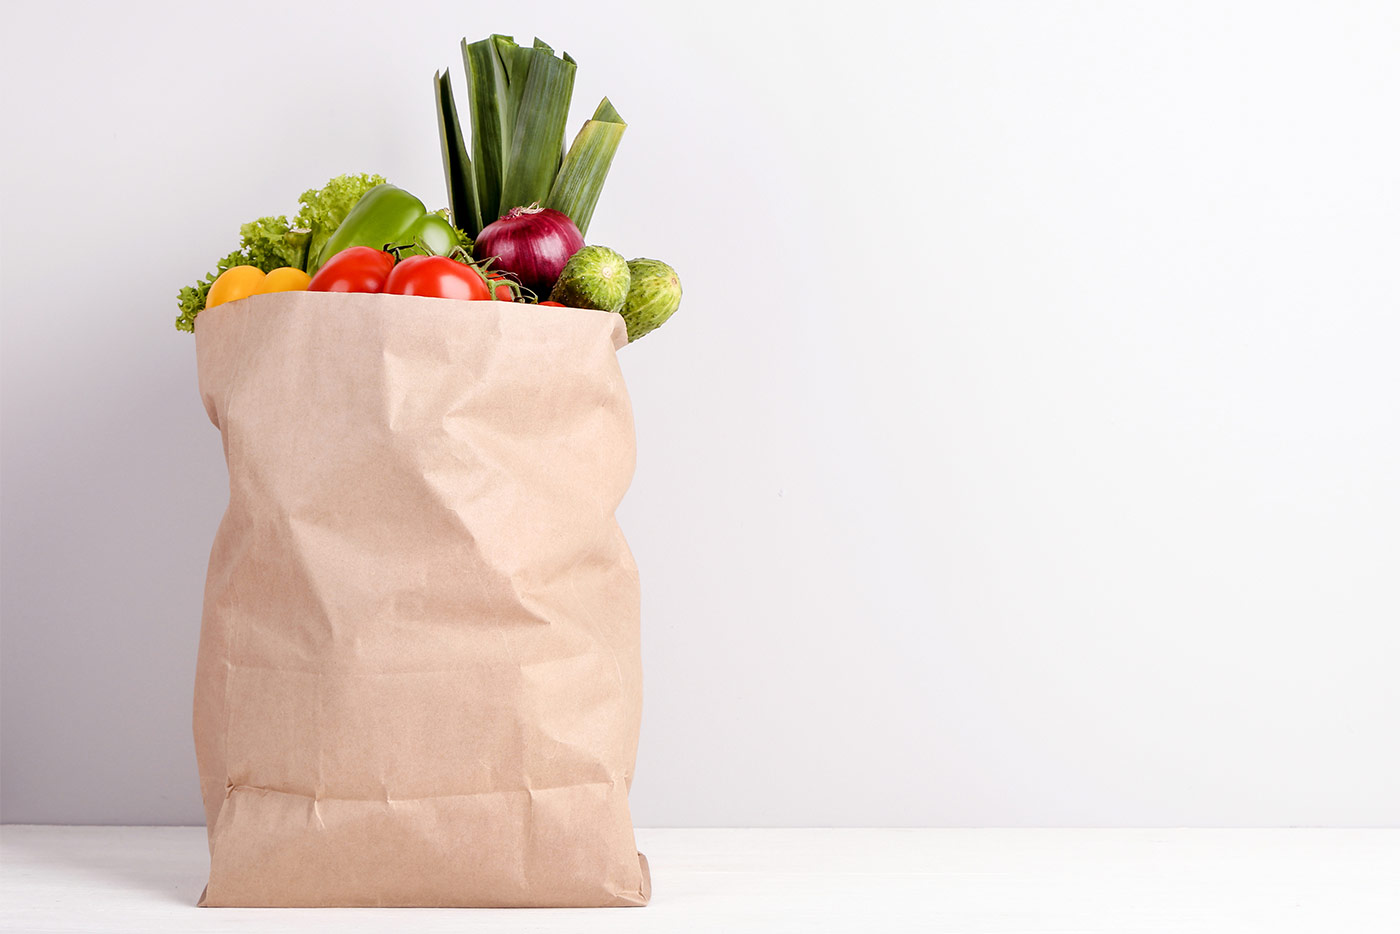 Grocery shopping bag with food